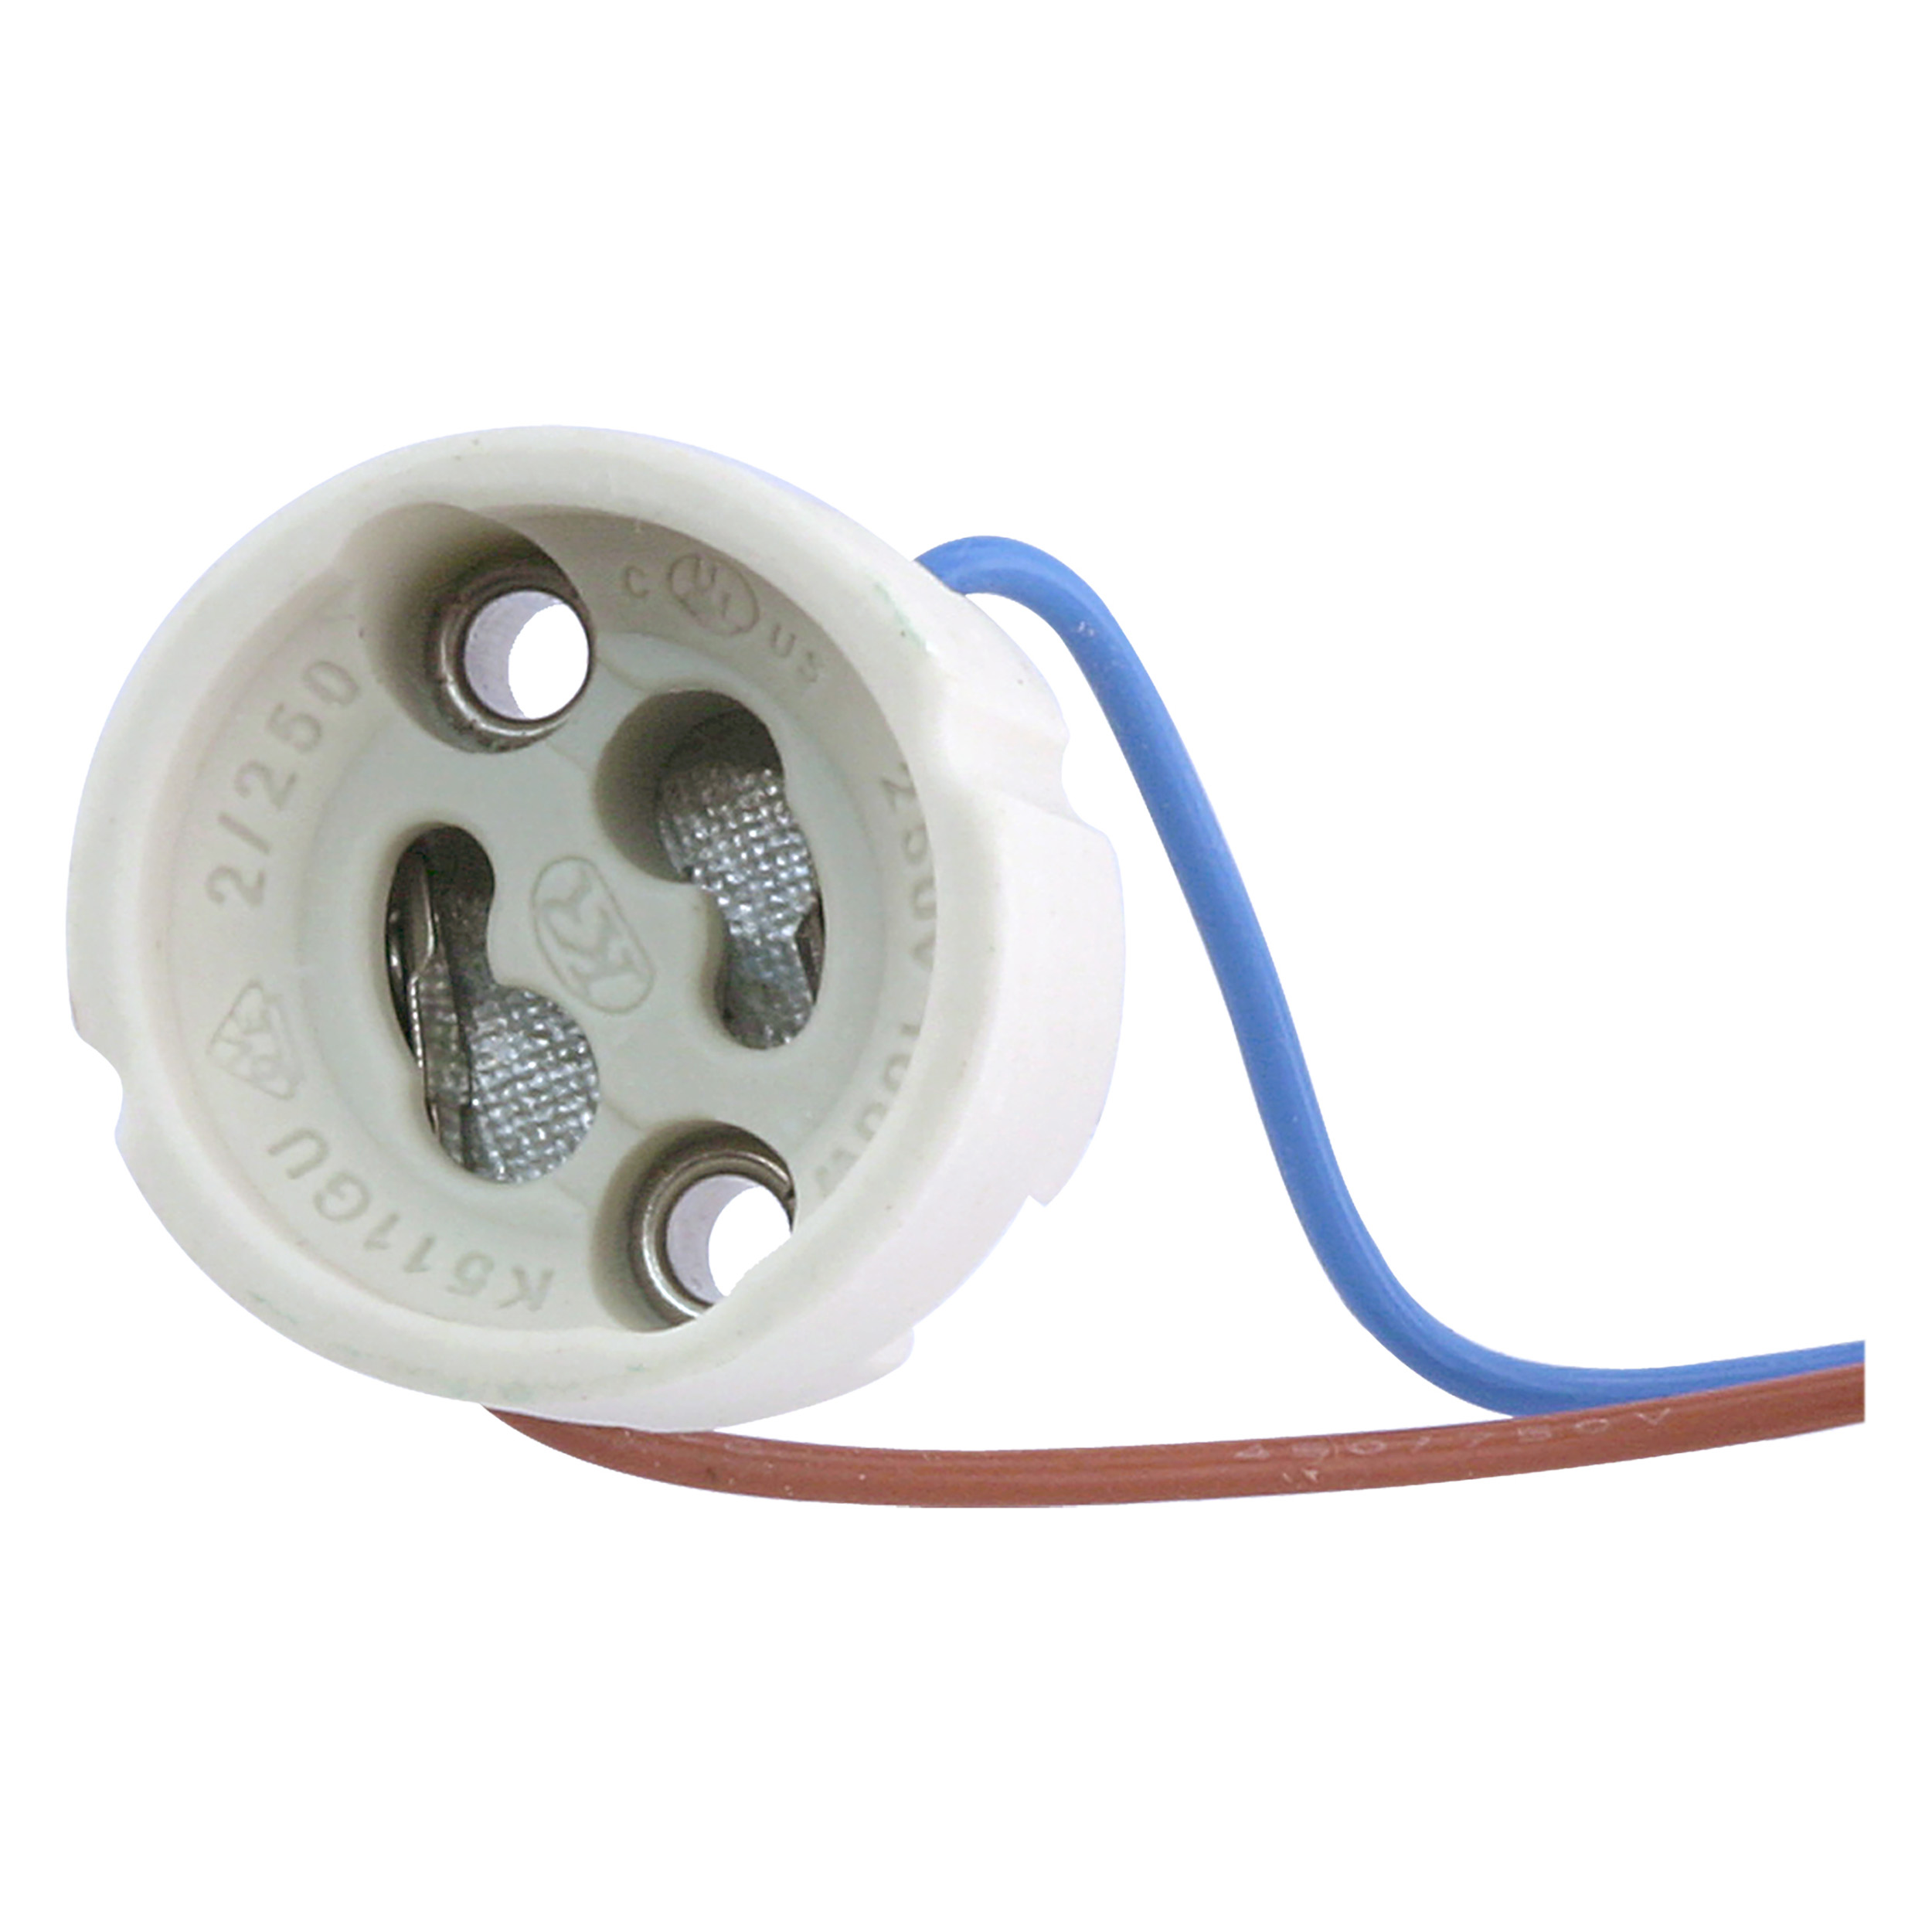 00.320.43   fitting type GU10 - halogeen/LED lamp - wit